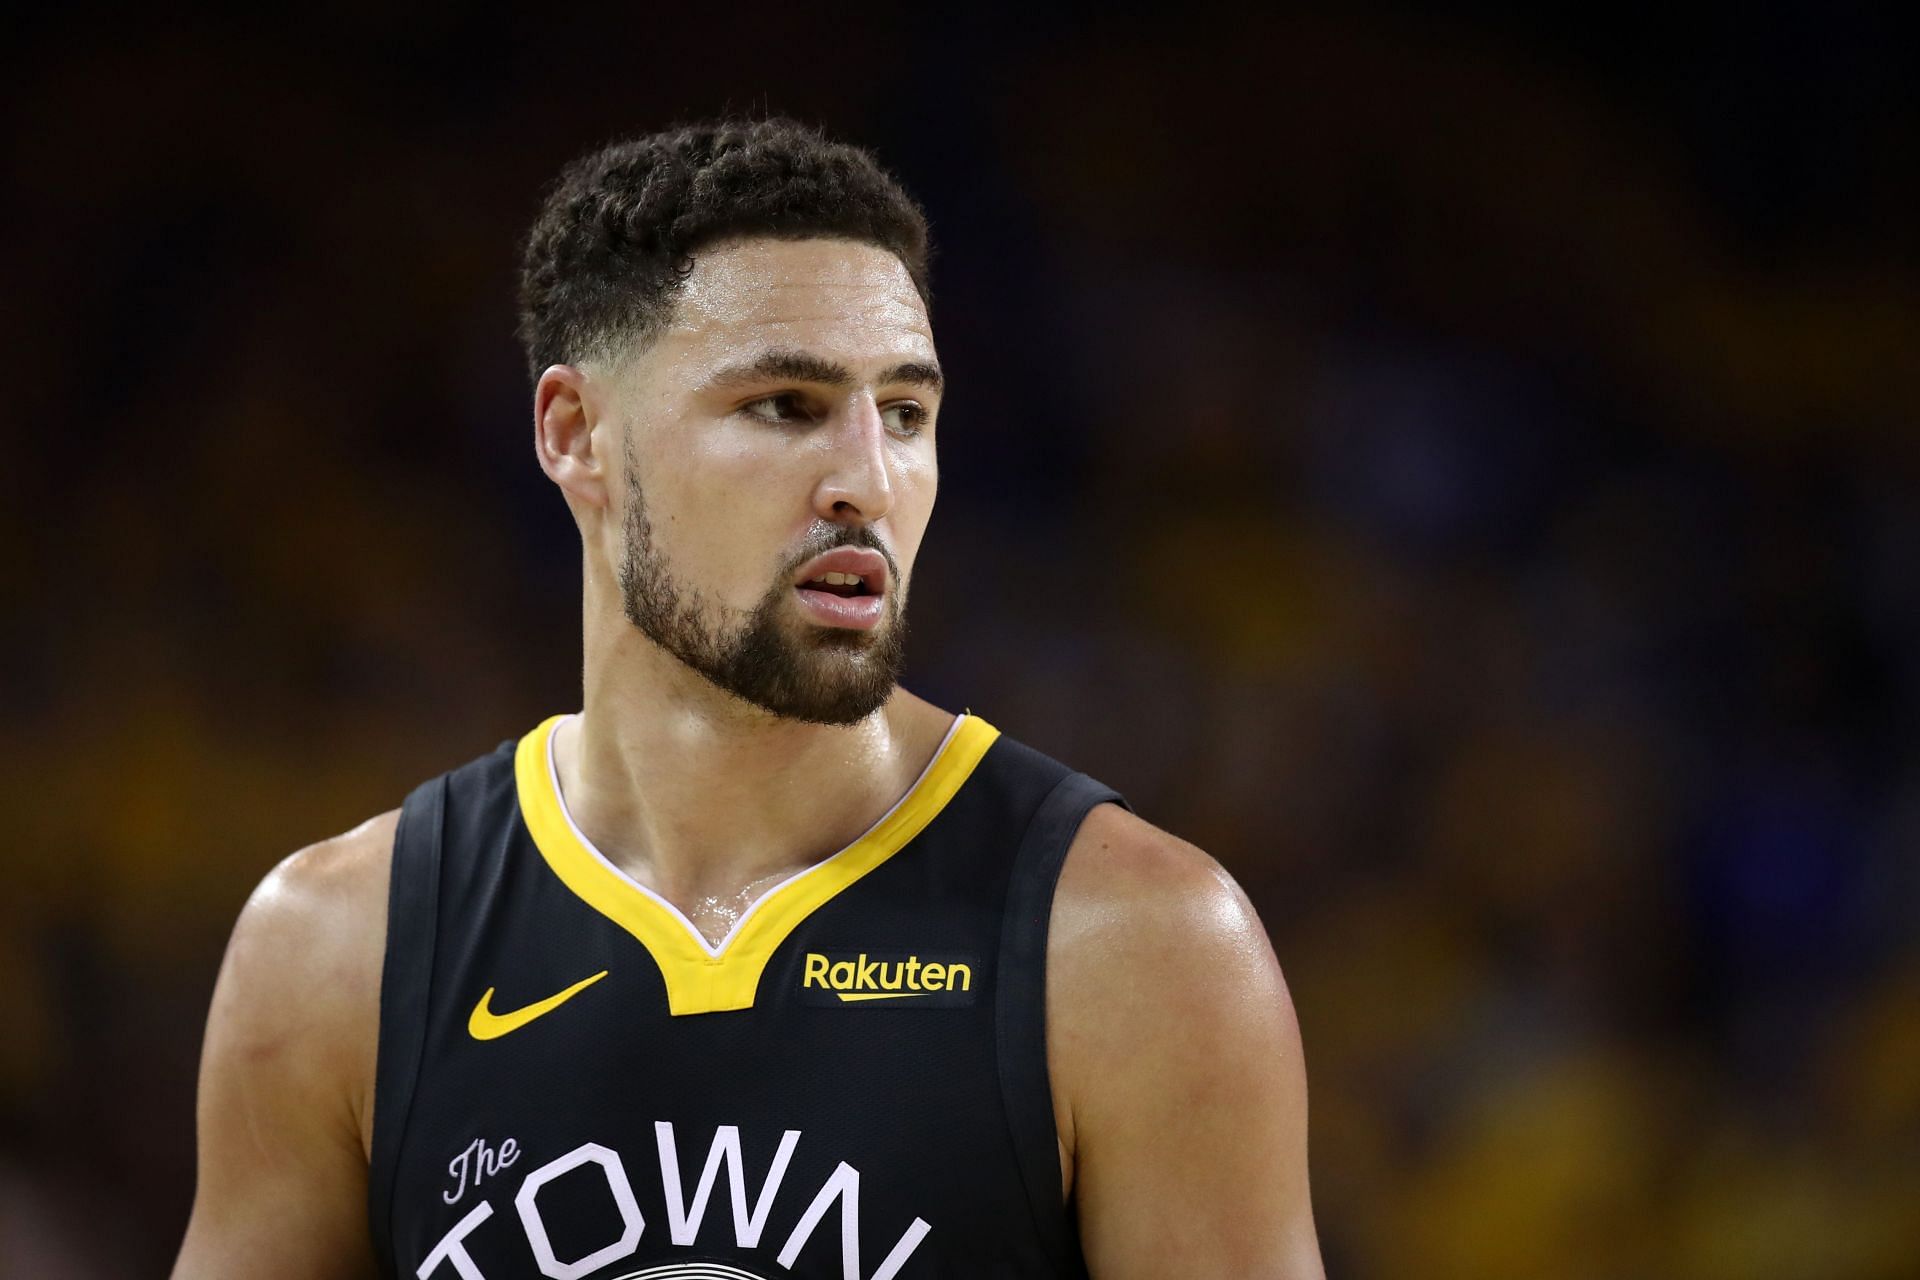 Golden State Warriors Klay Thompson in the 2019 NBA Finals